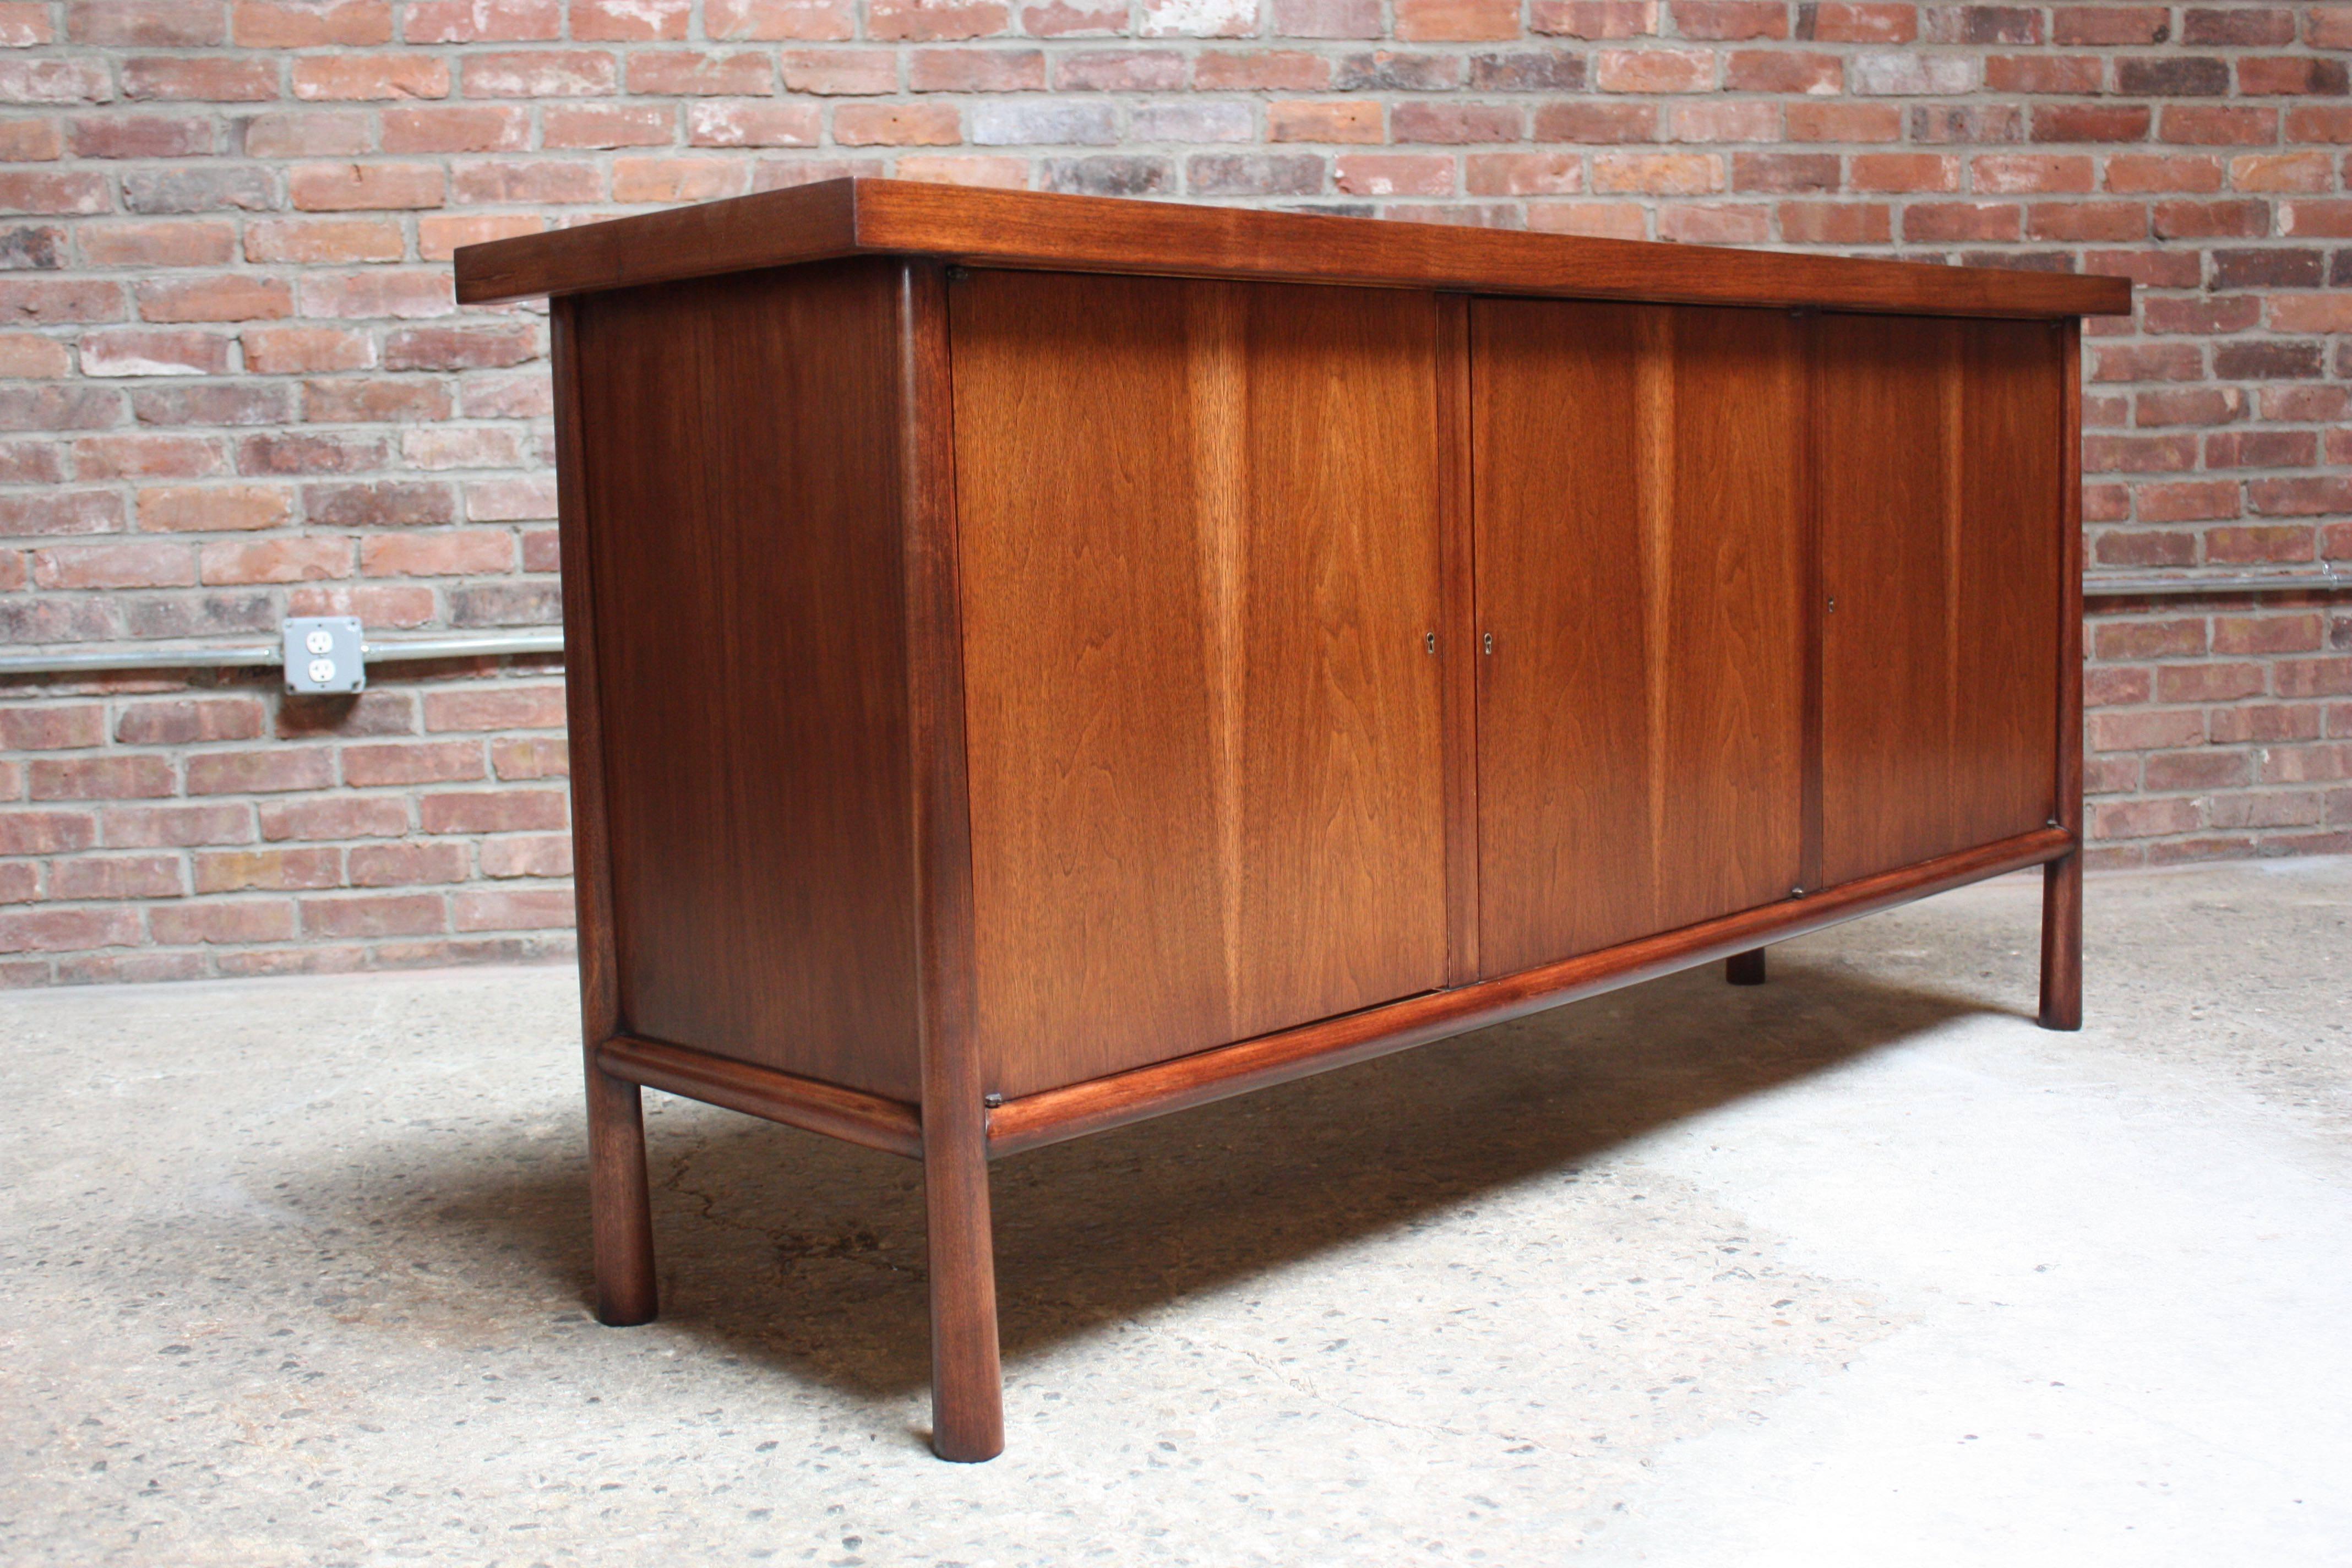 Exquisite and uncommon walnut three door-cabinet with oversized surface and sculptural, tapered legs designed by Robsjohn-Gibbings for Widdicomb in the 1950s. The left and right cabinet doors open to reveal adjustable shelves (one / side), and the